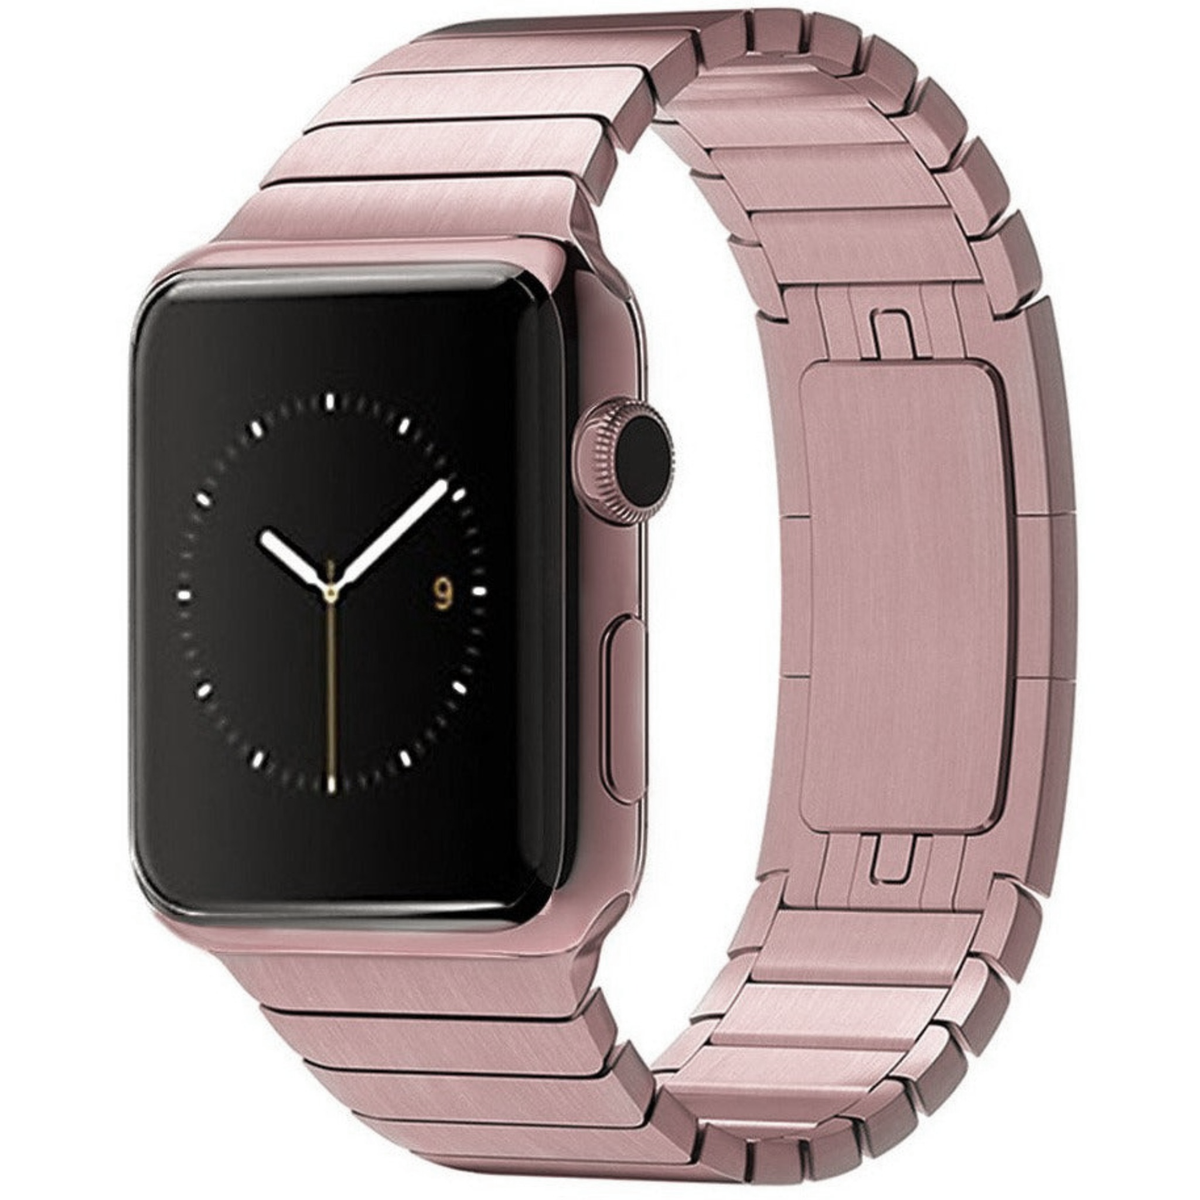 Rose Gold Ceramic Stainless Steel Apple Watch Band